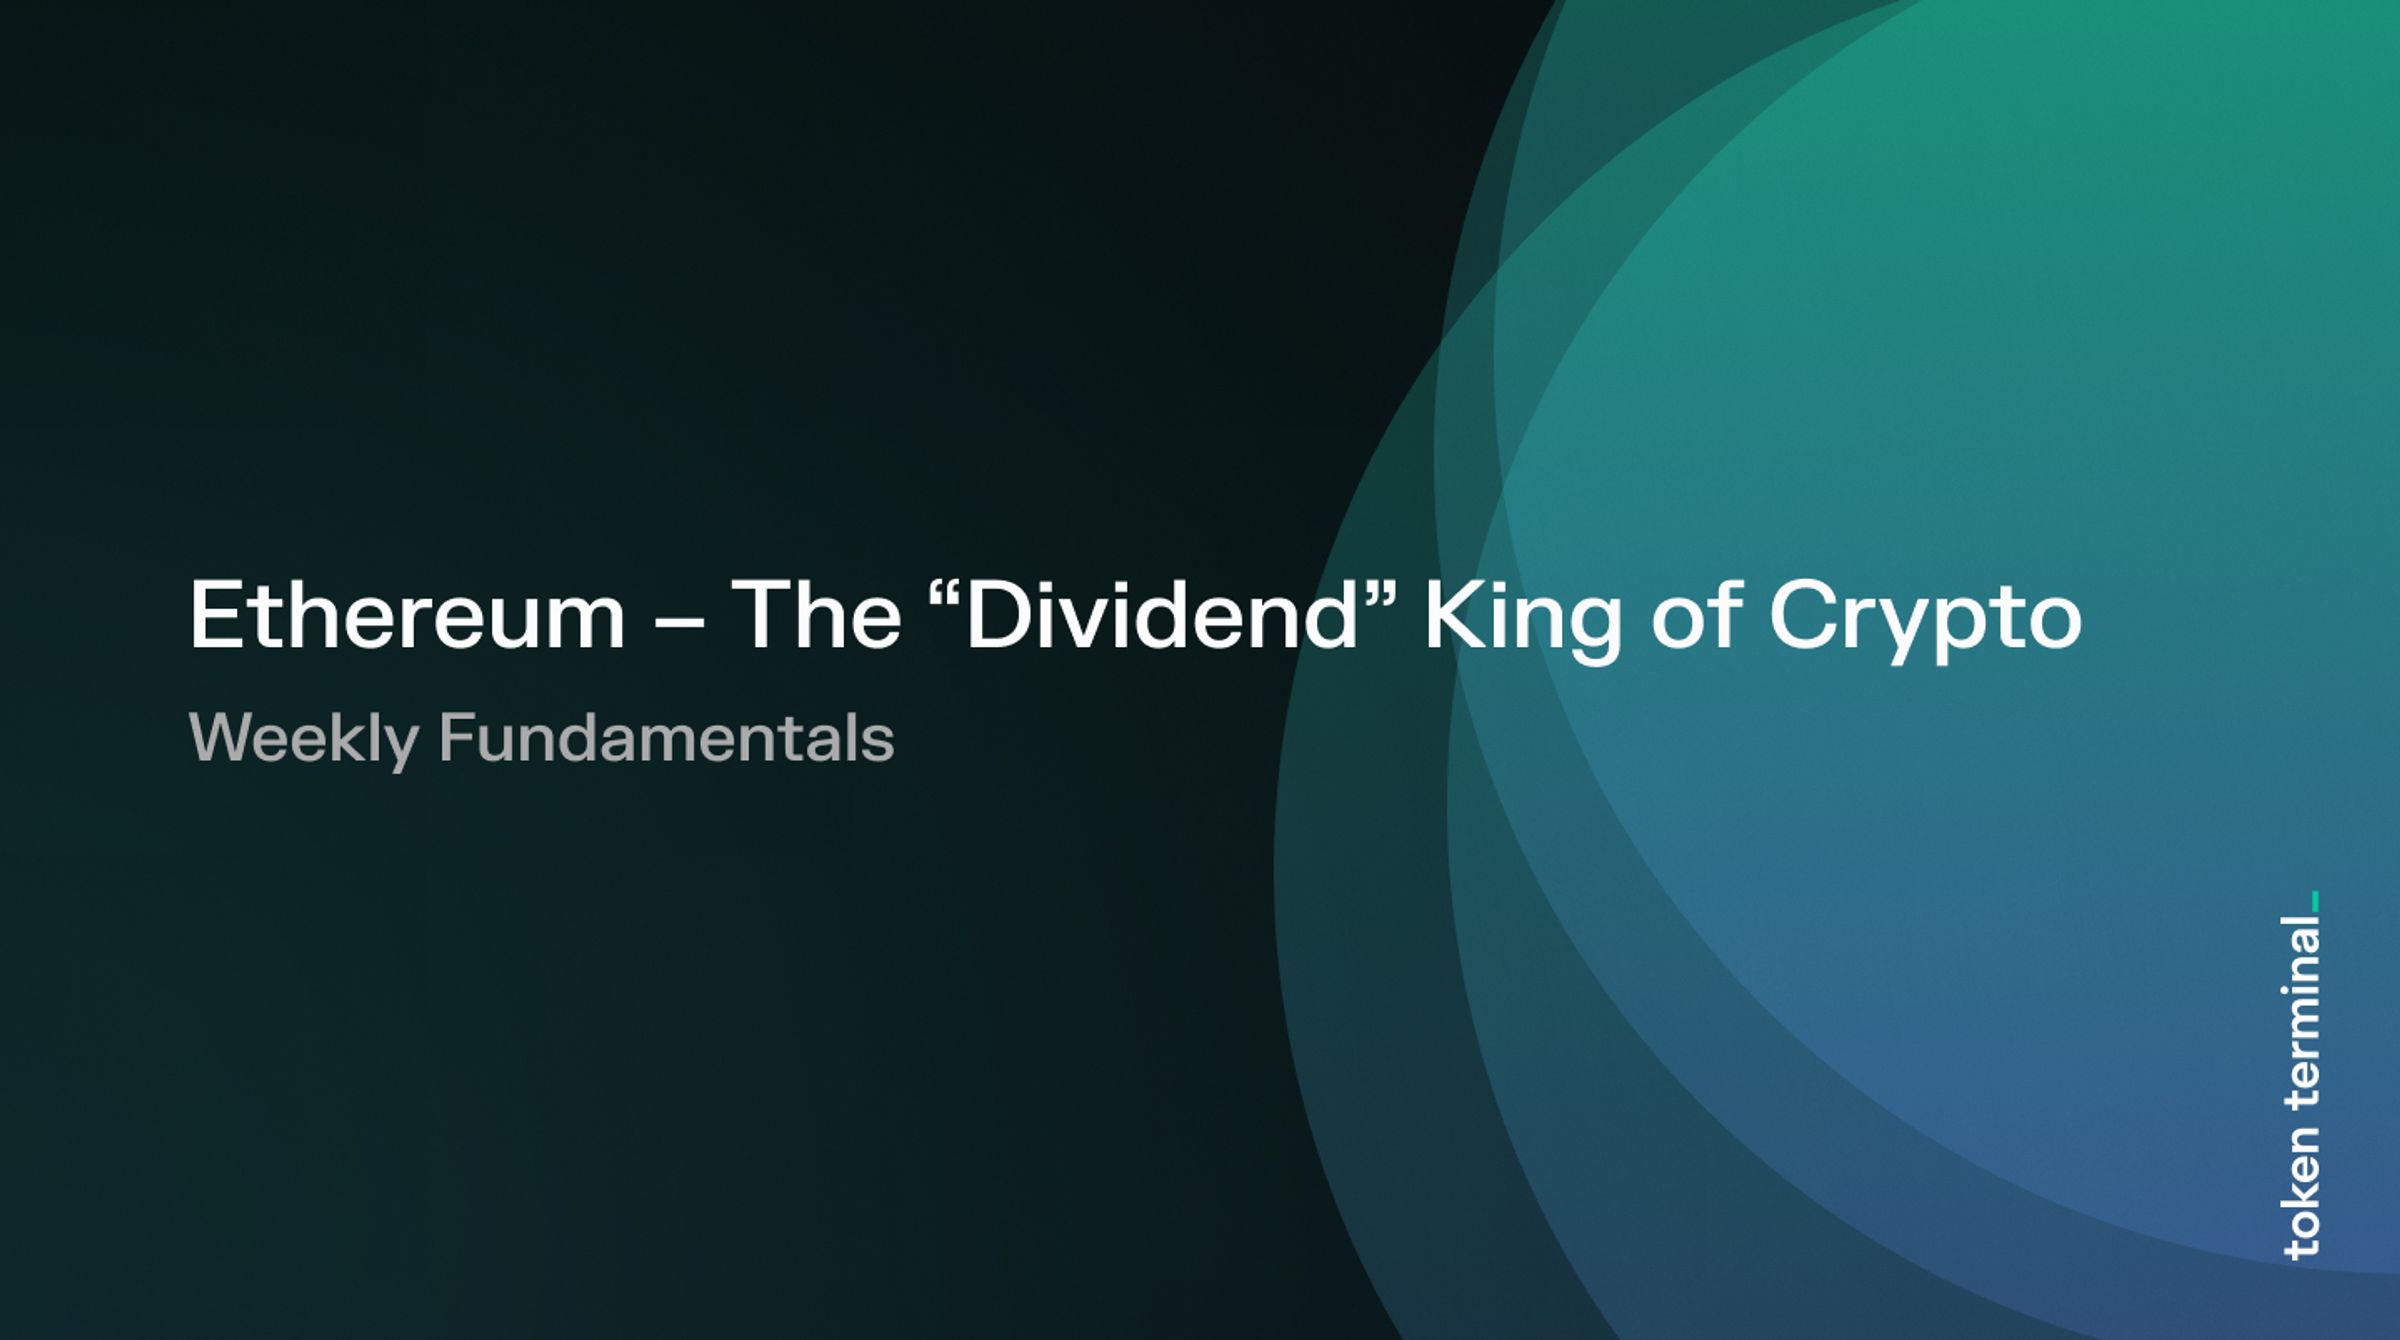 Ethereum – The “Dividend” King of Crypto